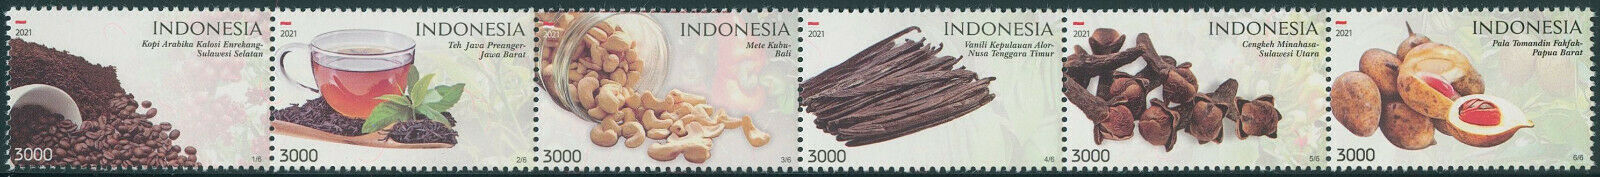 Indonesia 2021 MNH Gastronomy Stamps Geographical Food Plantations 6v Strip